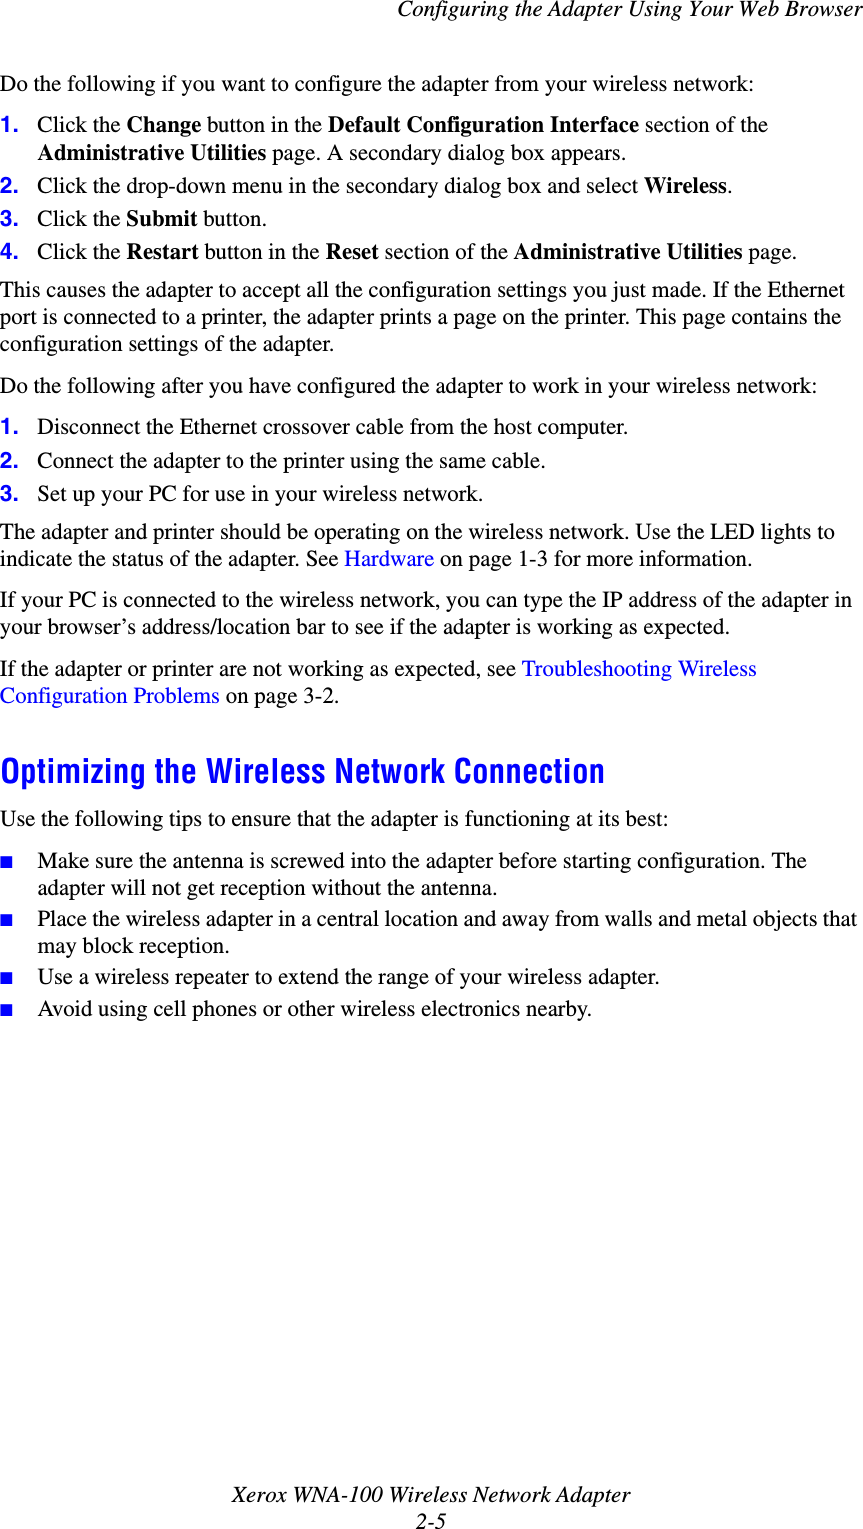 Configuring the Adapter Using Your Web BrowserXerox WNA-100 Wireless Network Adapter2-5Do the following if you want to configure the adapter from your wireless network:1. Click the Change button in the Default Configuration Interface section of the Administrative Utilities page. A secondary dialog box appears.2. Click the drop-down menu in the secondary dialog box and select Wireless.3. Click the Submit button.4. Click the Restart button in the Reset section of the Administrative Utilities page.This causes the adapter to accept all the configuration settings you just made. If the Ethernet port is connected to a printer, the adapter prints a page on the printer. This page contains the configuration settings of the adapter.Do the following after you have configured the adapter to work in your wireless network:1. Disconnect the Ethernet crossover cable from the host computer.2. Connect the adapter to the printer using the same cable.3. Set up your PC for use in your wireless network.The adapter and printer should be operating on the wireless network. Use the LED lights to indicate the status of the adapter. See Hardware on page 1-3 for more information.If your PC is connected to the wireless network, you can type the IP address of the adapter in your browser’s address/location bar to see if the adapter is working as expected.If the adapter or printer are not working as expected, see Troubleshooting Wireless Configuration Problems on page 3-2.Optimizing the Wireless Network ConnectionUse the following tips to ensure that the adapter is functioning at its best:■Make sure the antenna is screwed into the adapter before starting configuration. The adapter will not get reception without the antenna.■Place the wireless adapter in a central location and away from walls and metal objects that may block reception.■Use a wireless repeater to extend the range of your wireless adapter.■Avoid using cell phones or other wireless electronics nearby.